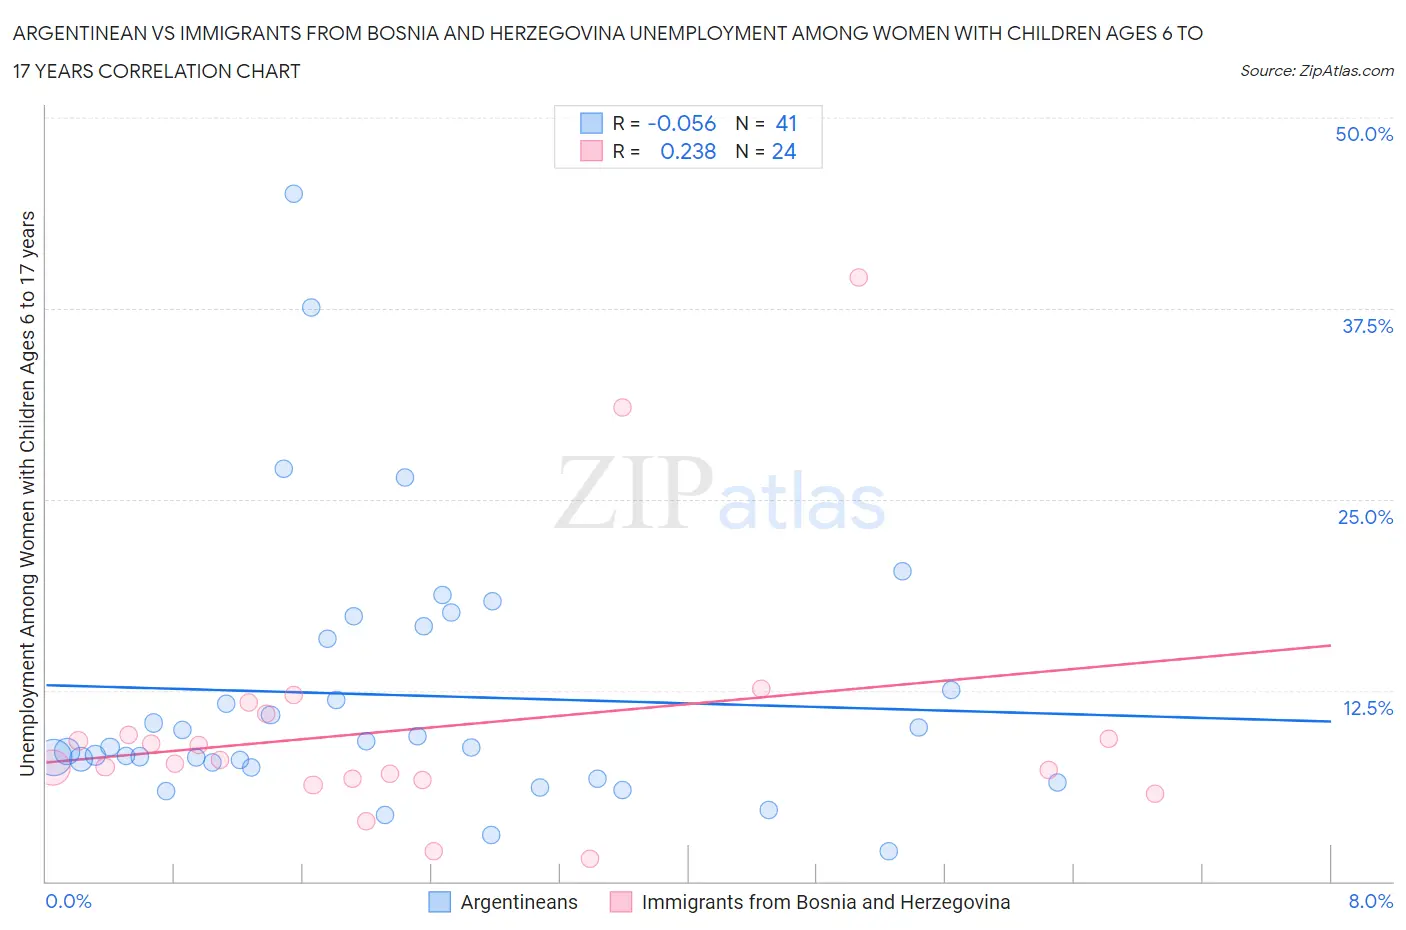 Argentinean vs Immigrants from Bosnia and Herzegovina Unemployment Among Women with Children Ages 6 to 17 years